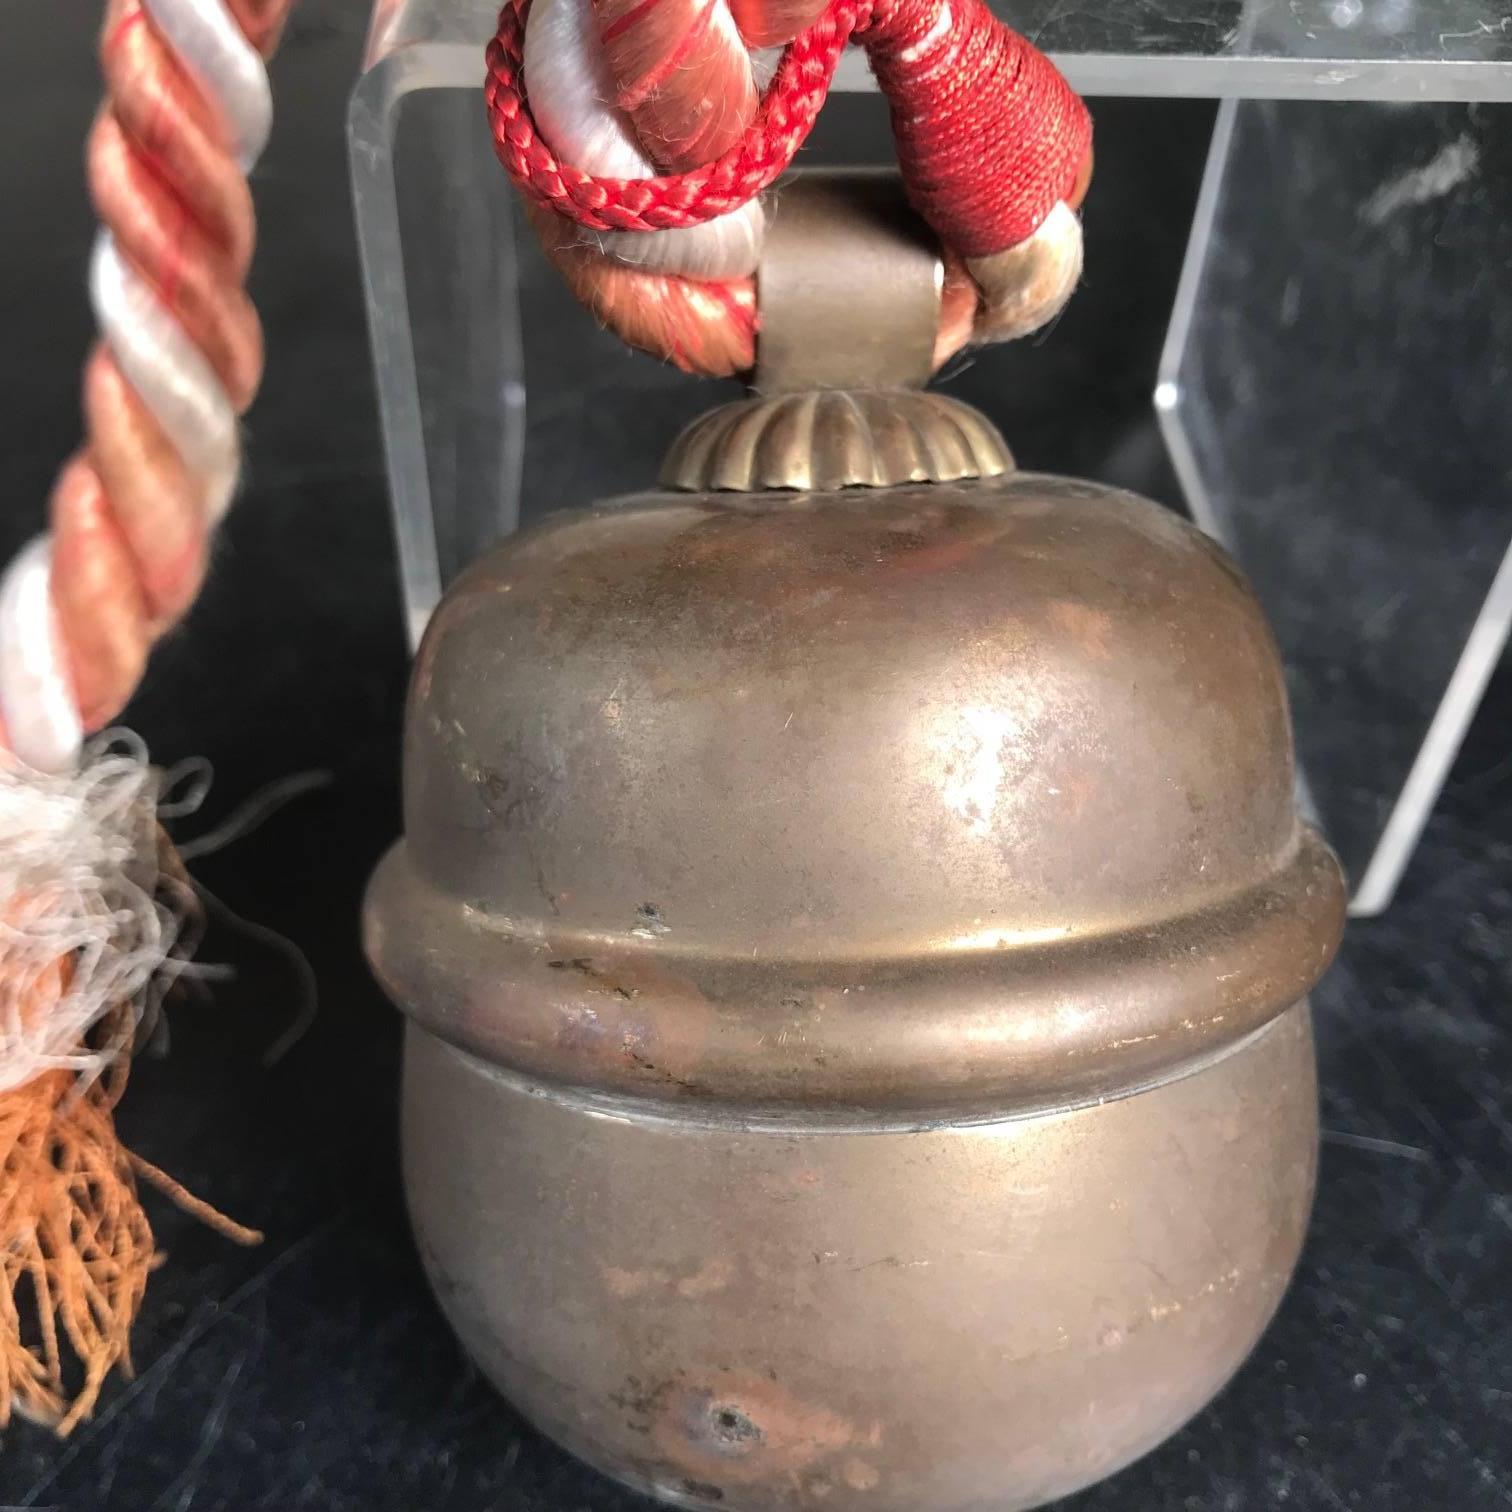 From our recent Japanese acquisitions travels.

Here's an extraordinary opportunity to collect and acquire a Japanese authentic hand cast copper Shinto Suzu bell complete with its long and thick hand crafted pull rope. The bell shows good patina